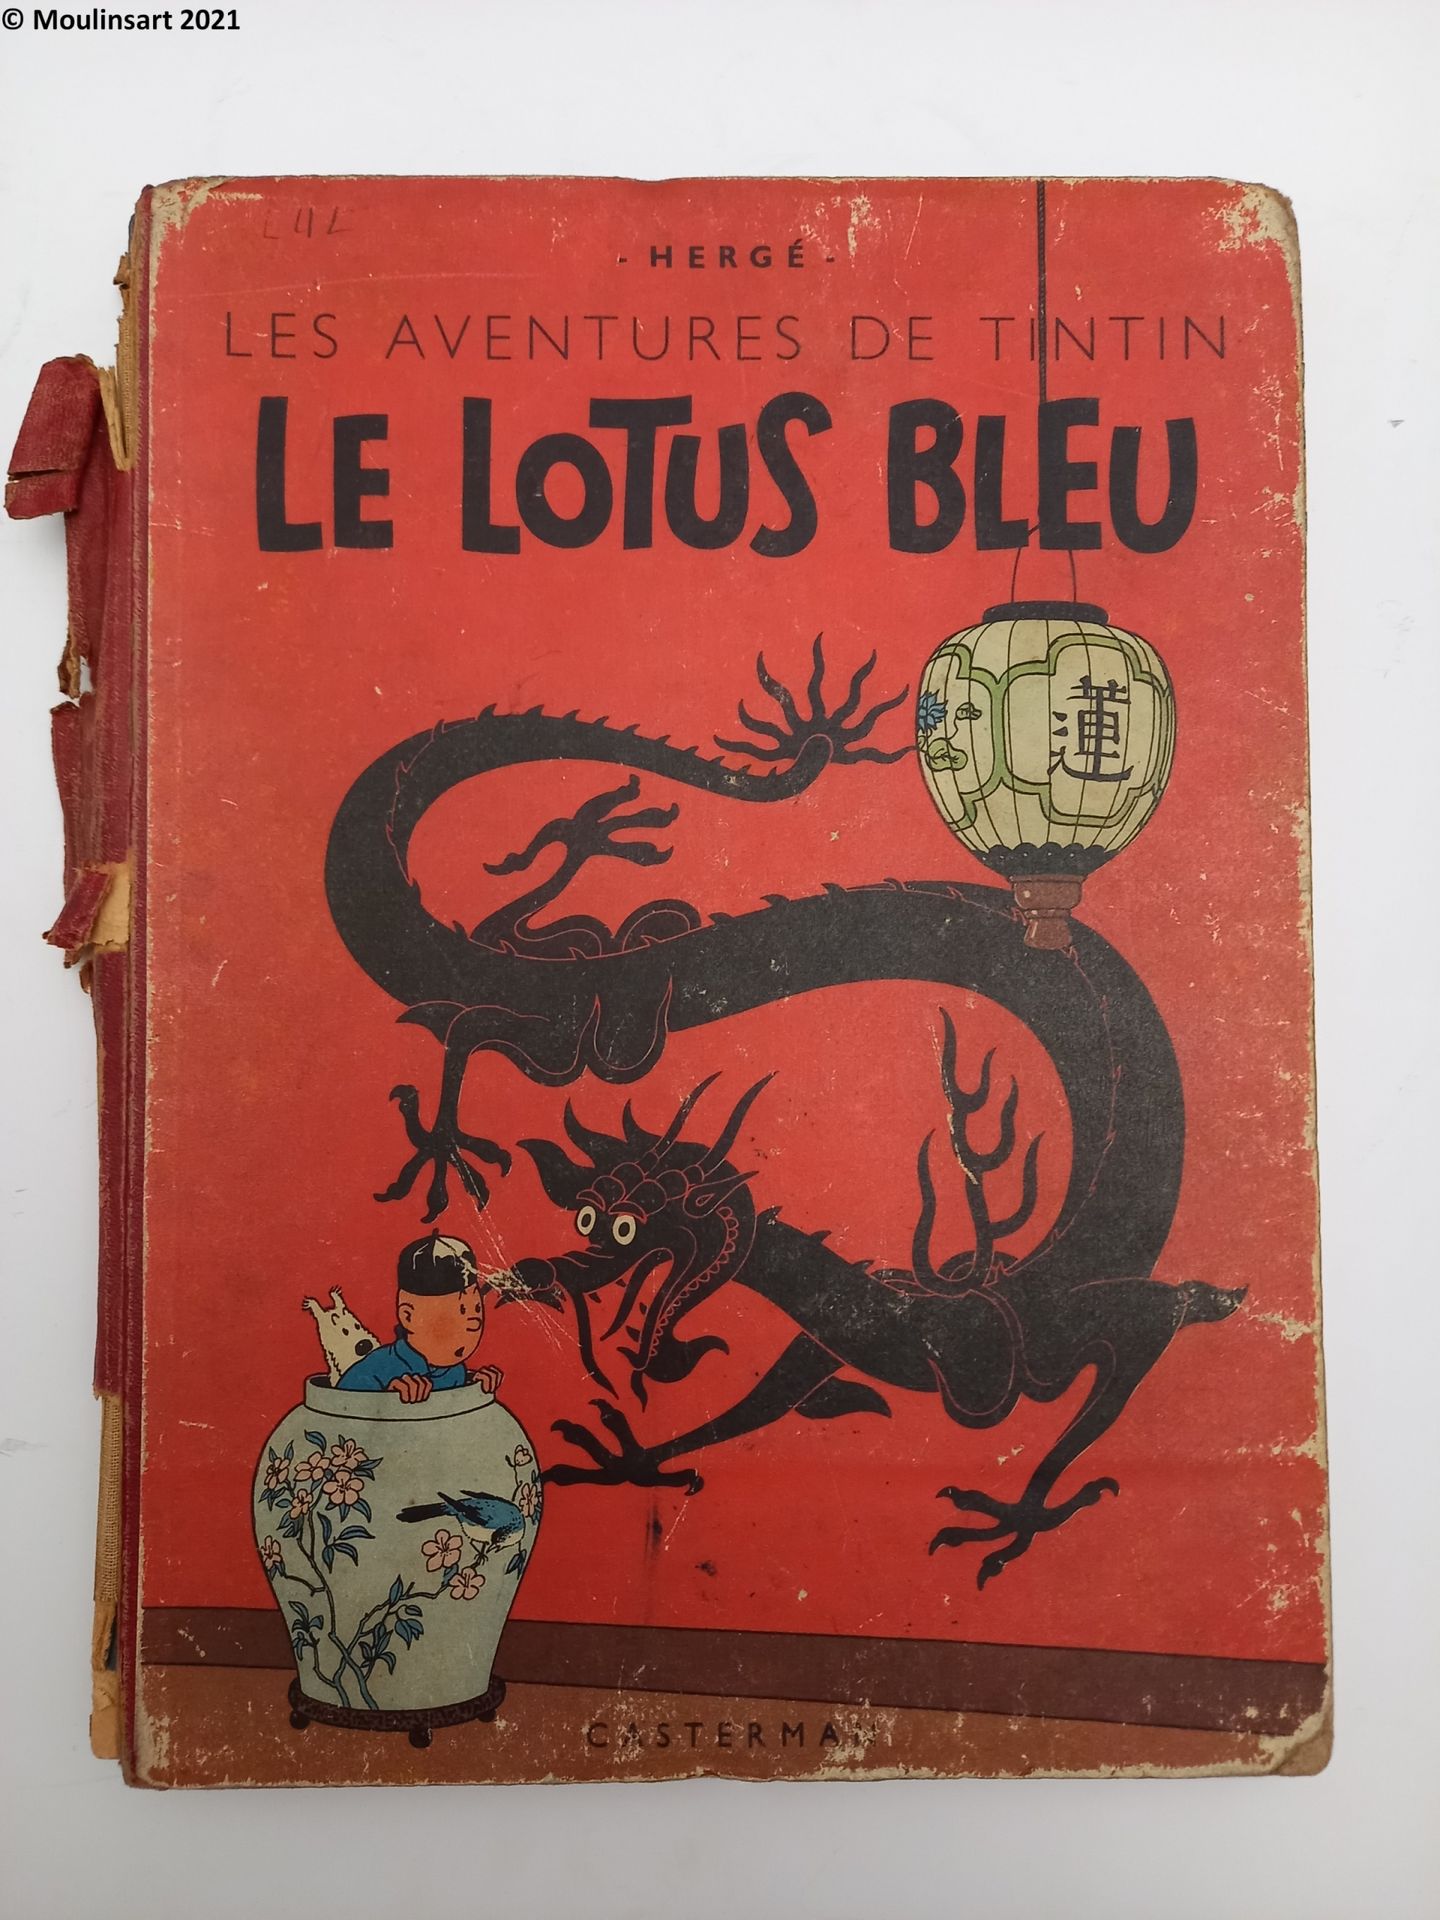 HERGÉ HERGE

The blue lotus



A 18 DR pellior, black and white, large image, 20&hellip;